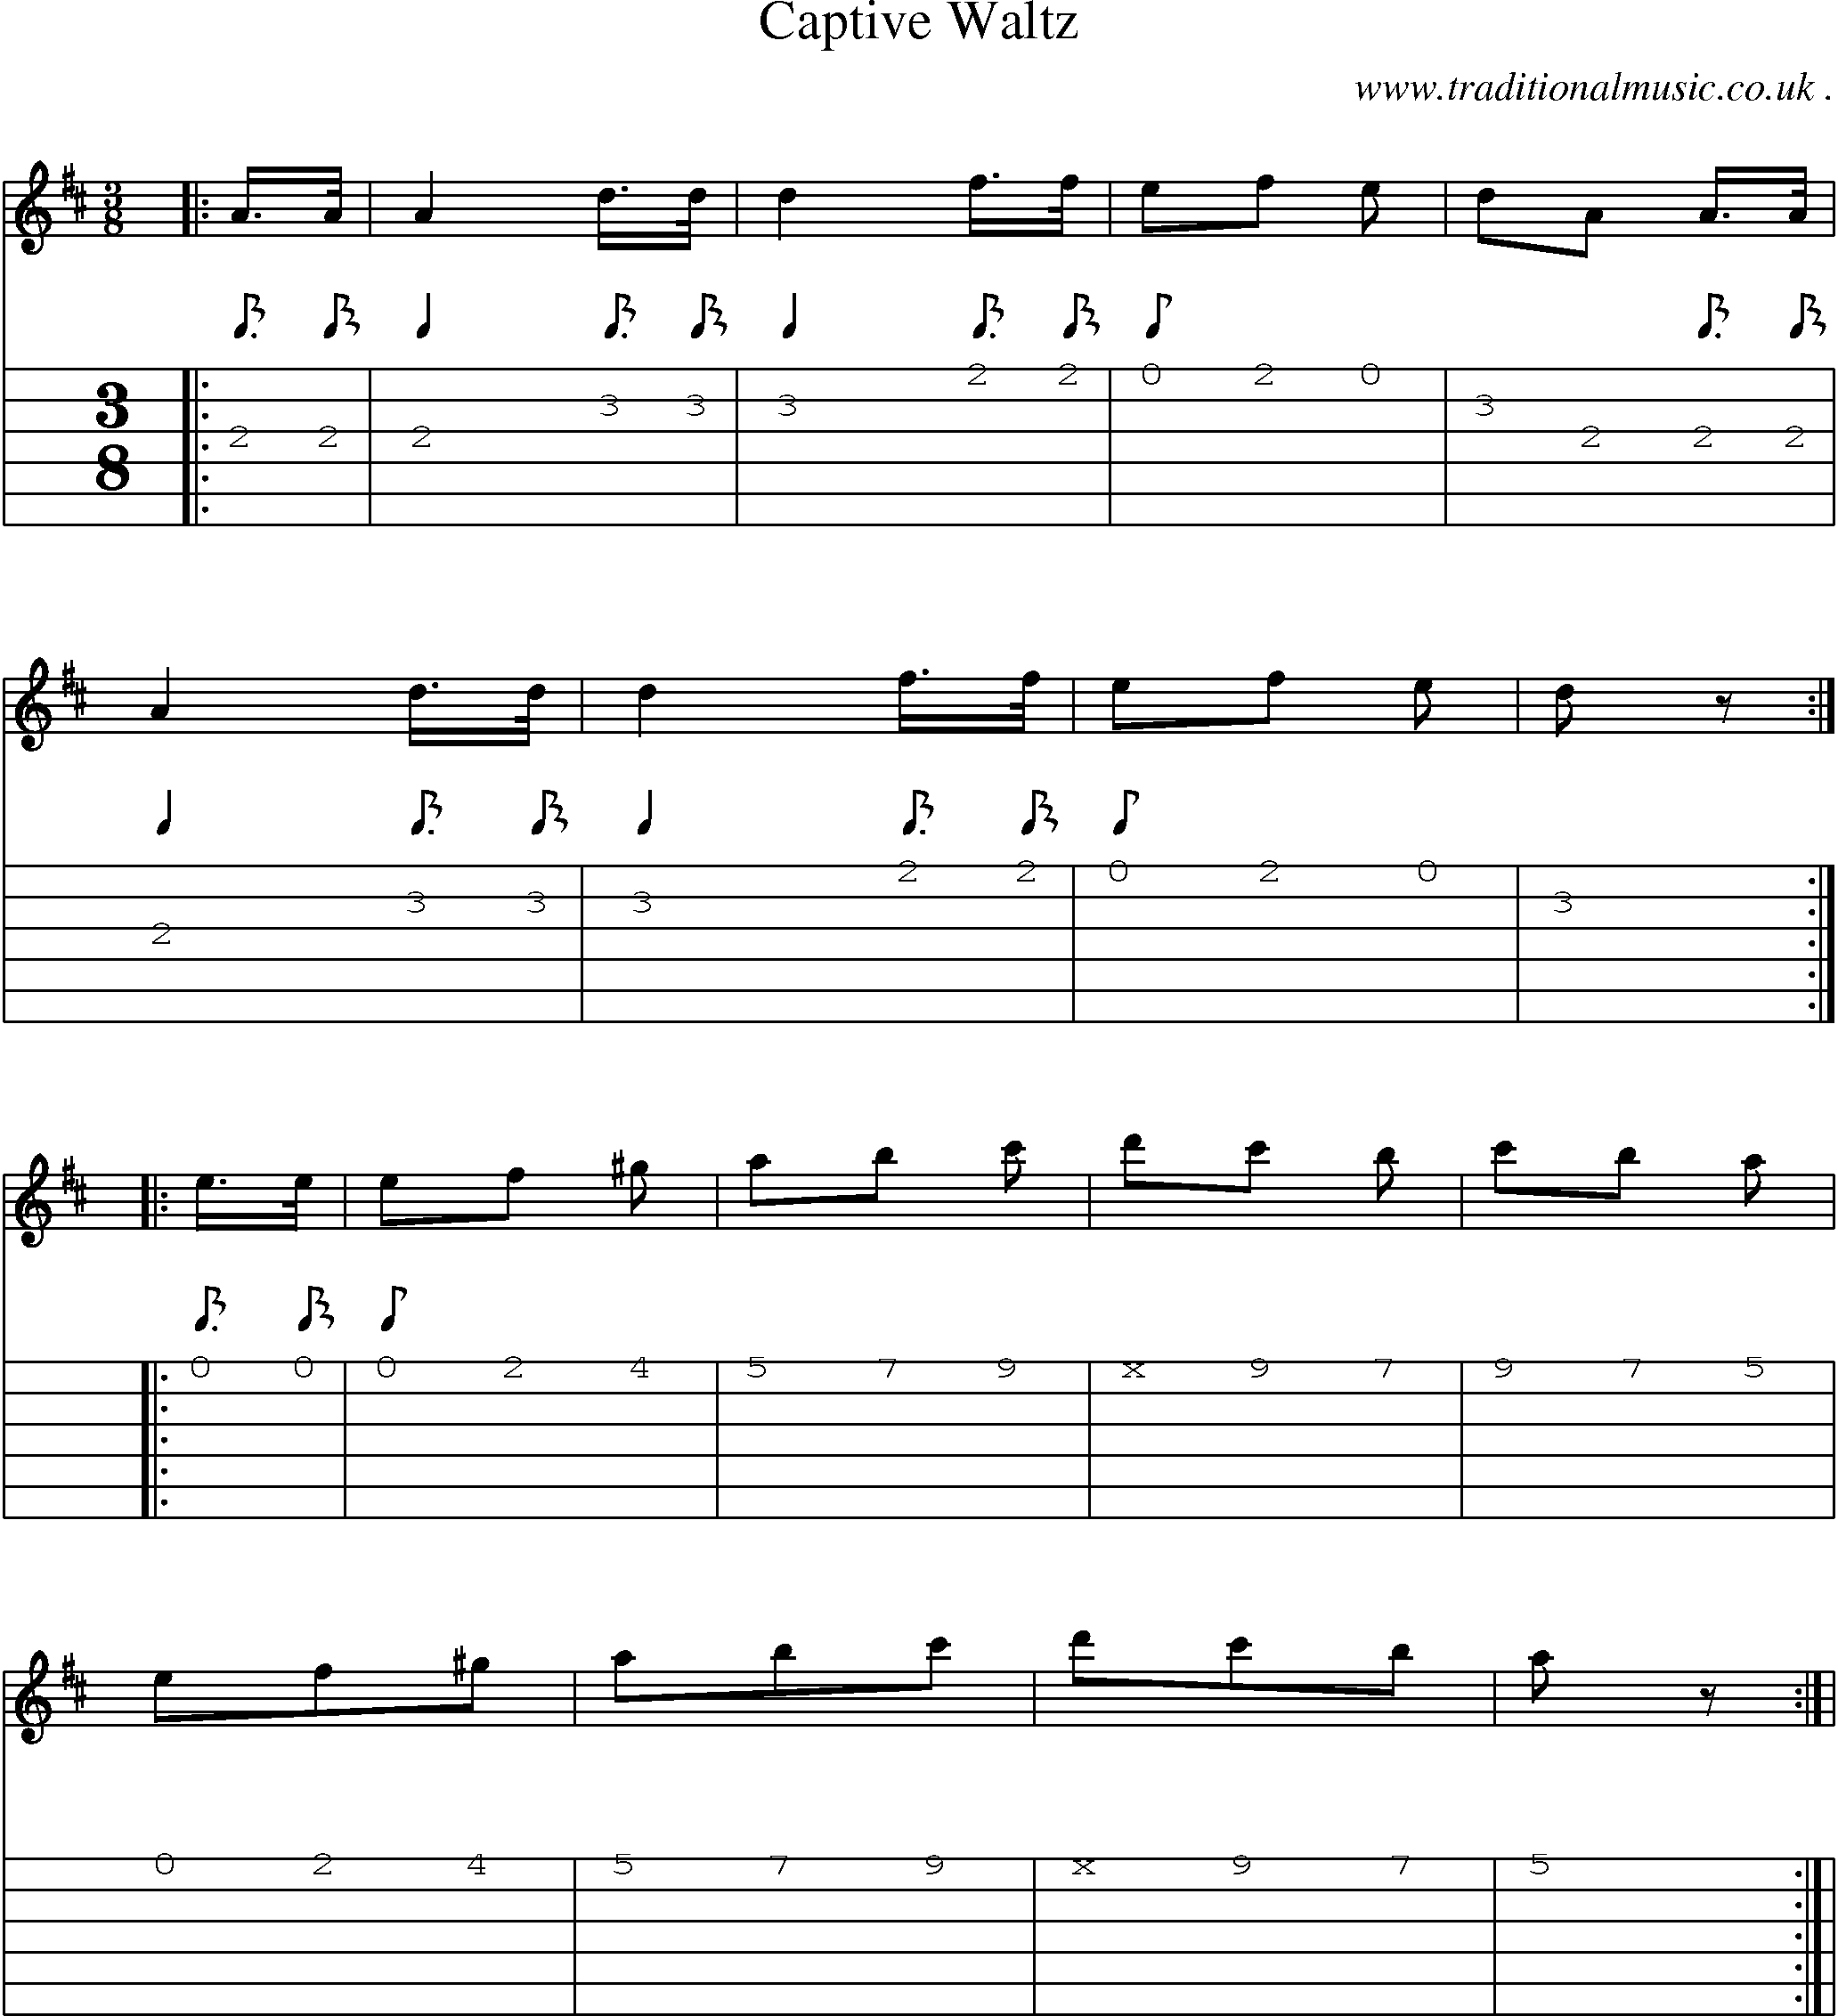 Sheet-Music and Guitar Tabs for Captive Waltz